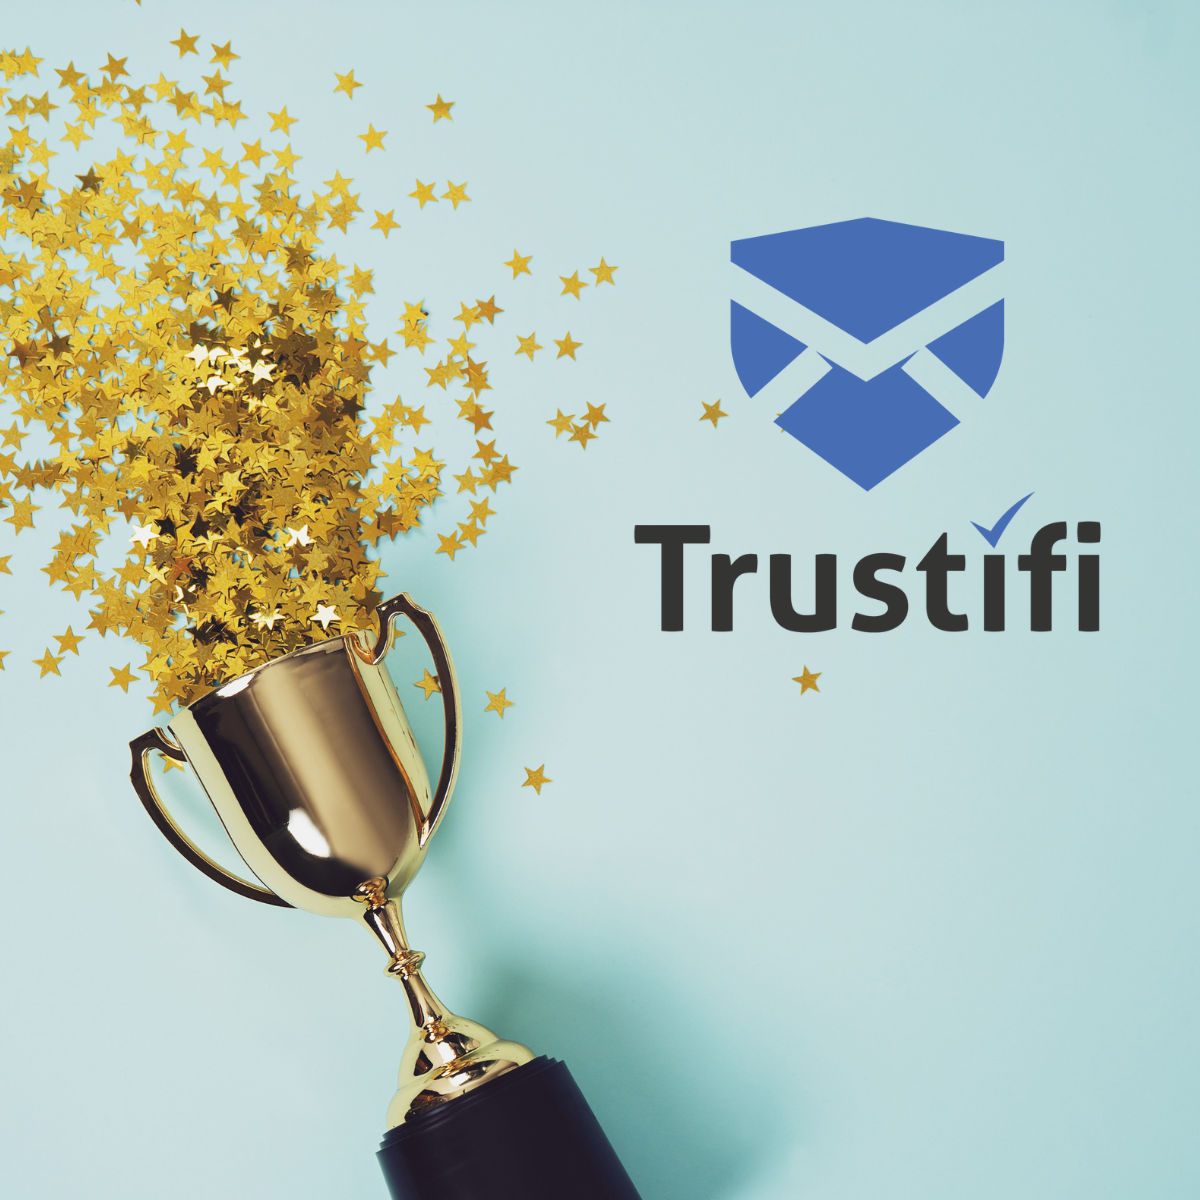 Trustifi Wins Multiple Industry Awards for Innovative Products, Services & Leadership